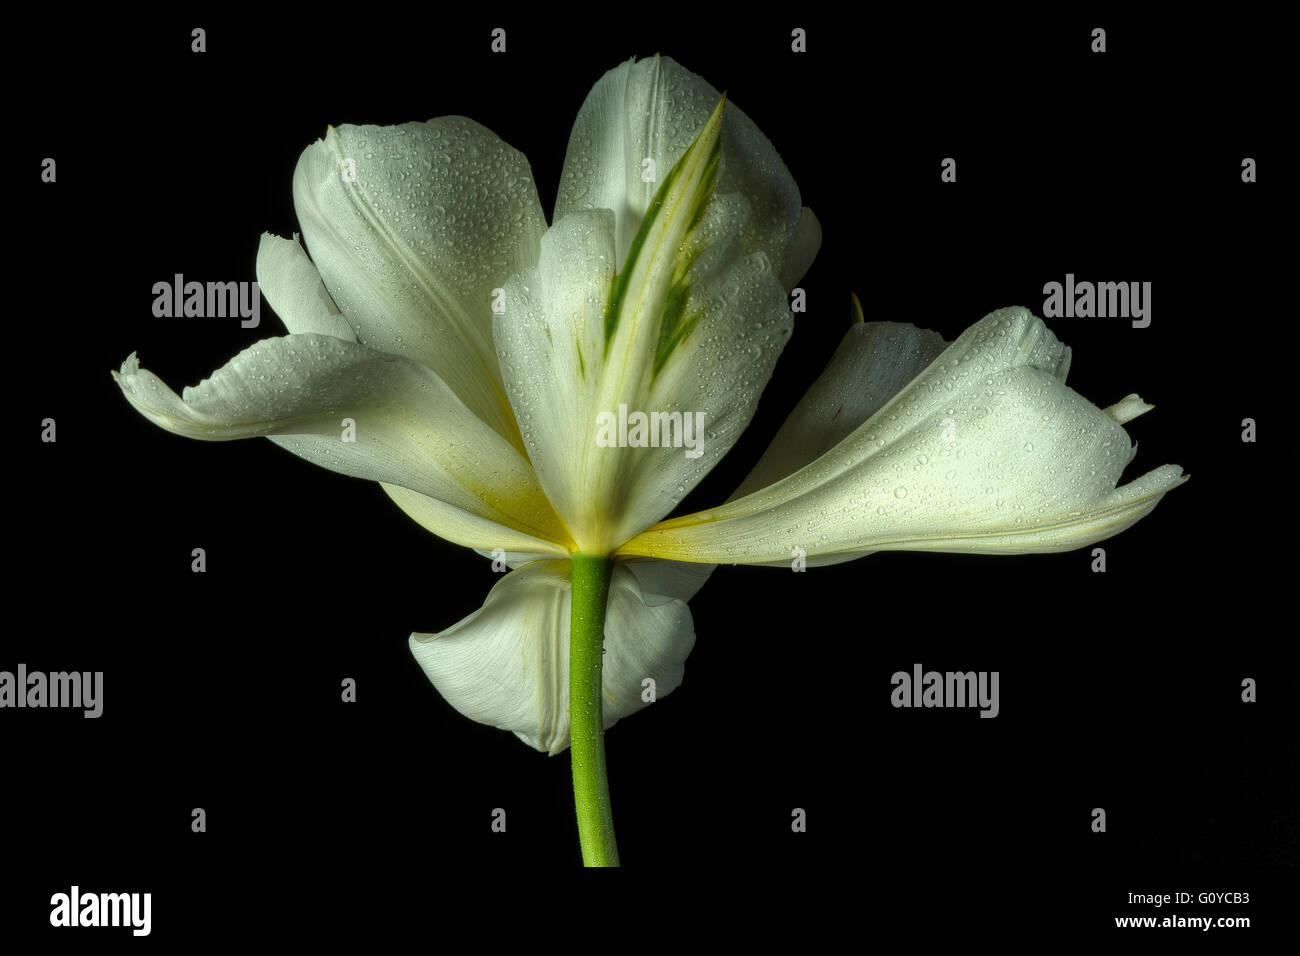 Tulip 'Exotic Emperor', Tulipa, Tulipa fosteriana 'Exotic Emperor', Beauty in Nature, Bulb, Colour, Contemporary, Cottage garden plant, Creative, Cut out, Droplets, Drops, Flower, Spring Flowering, Frost hardy, Plant, Studio, Water, Wet, White, Black, Stock Photo